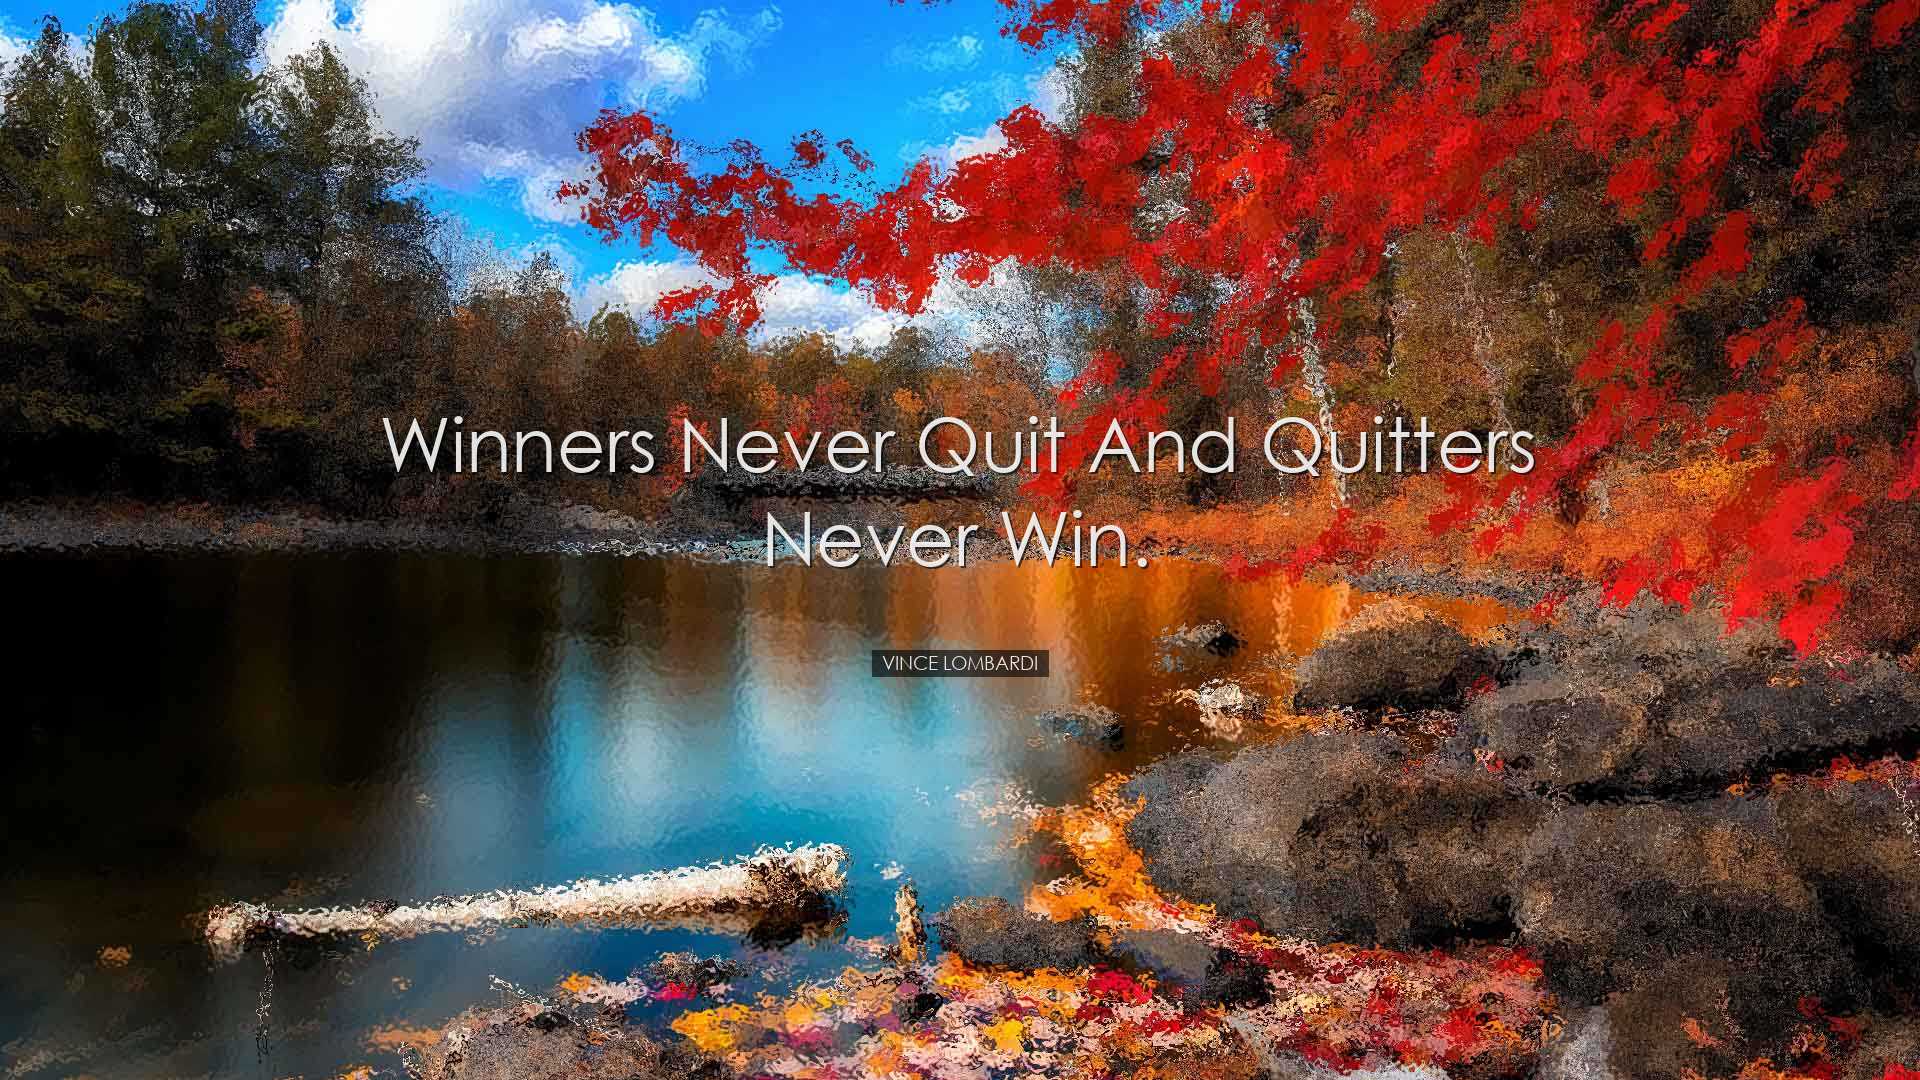 Winners never quit and quitters never win. - Vince Lombardi